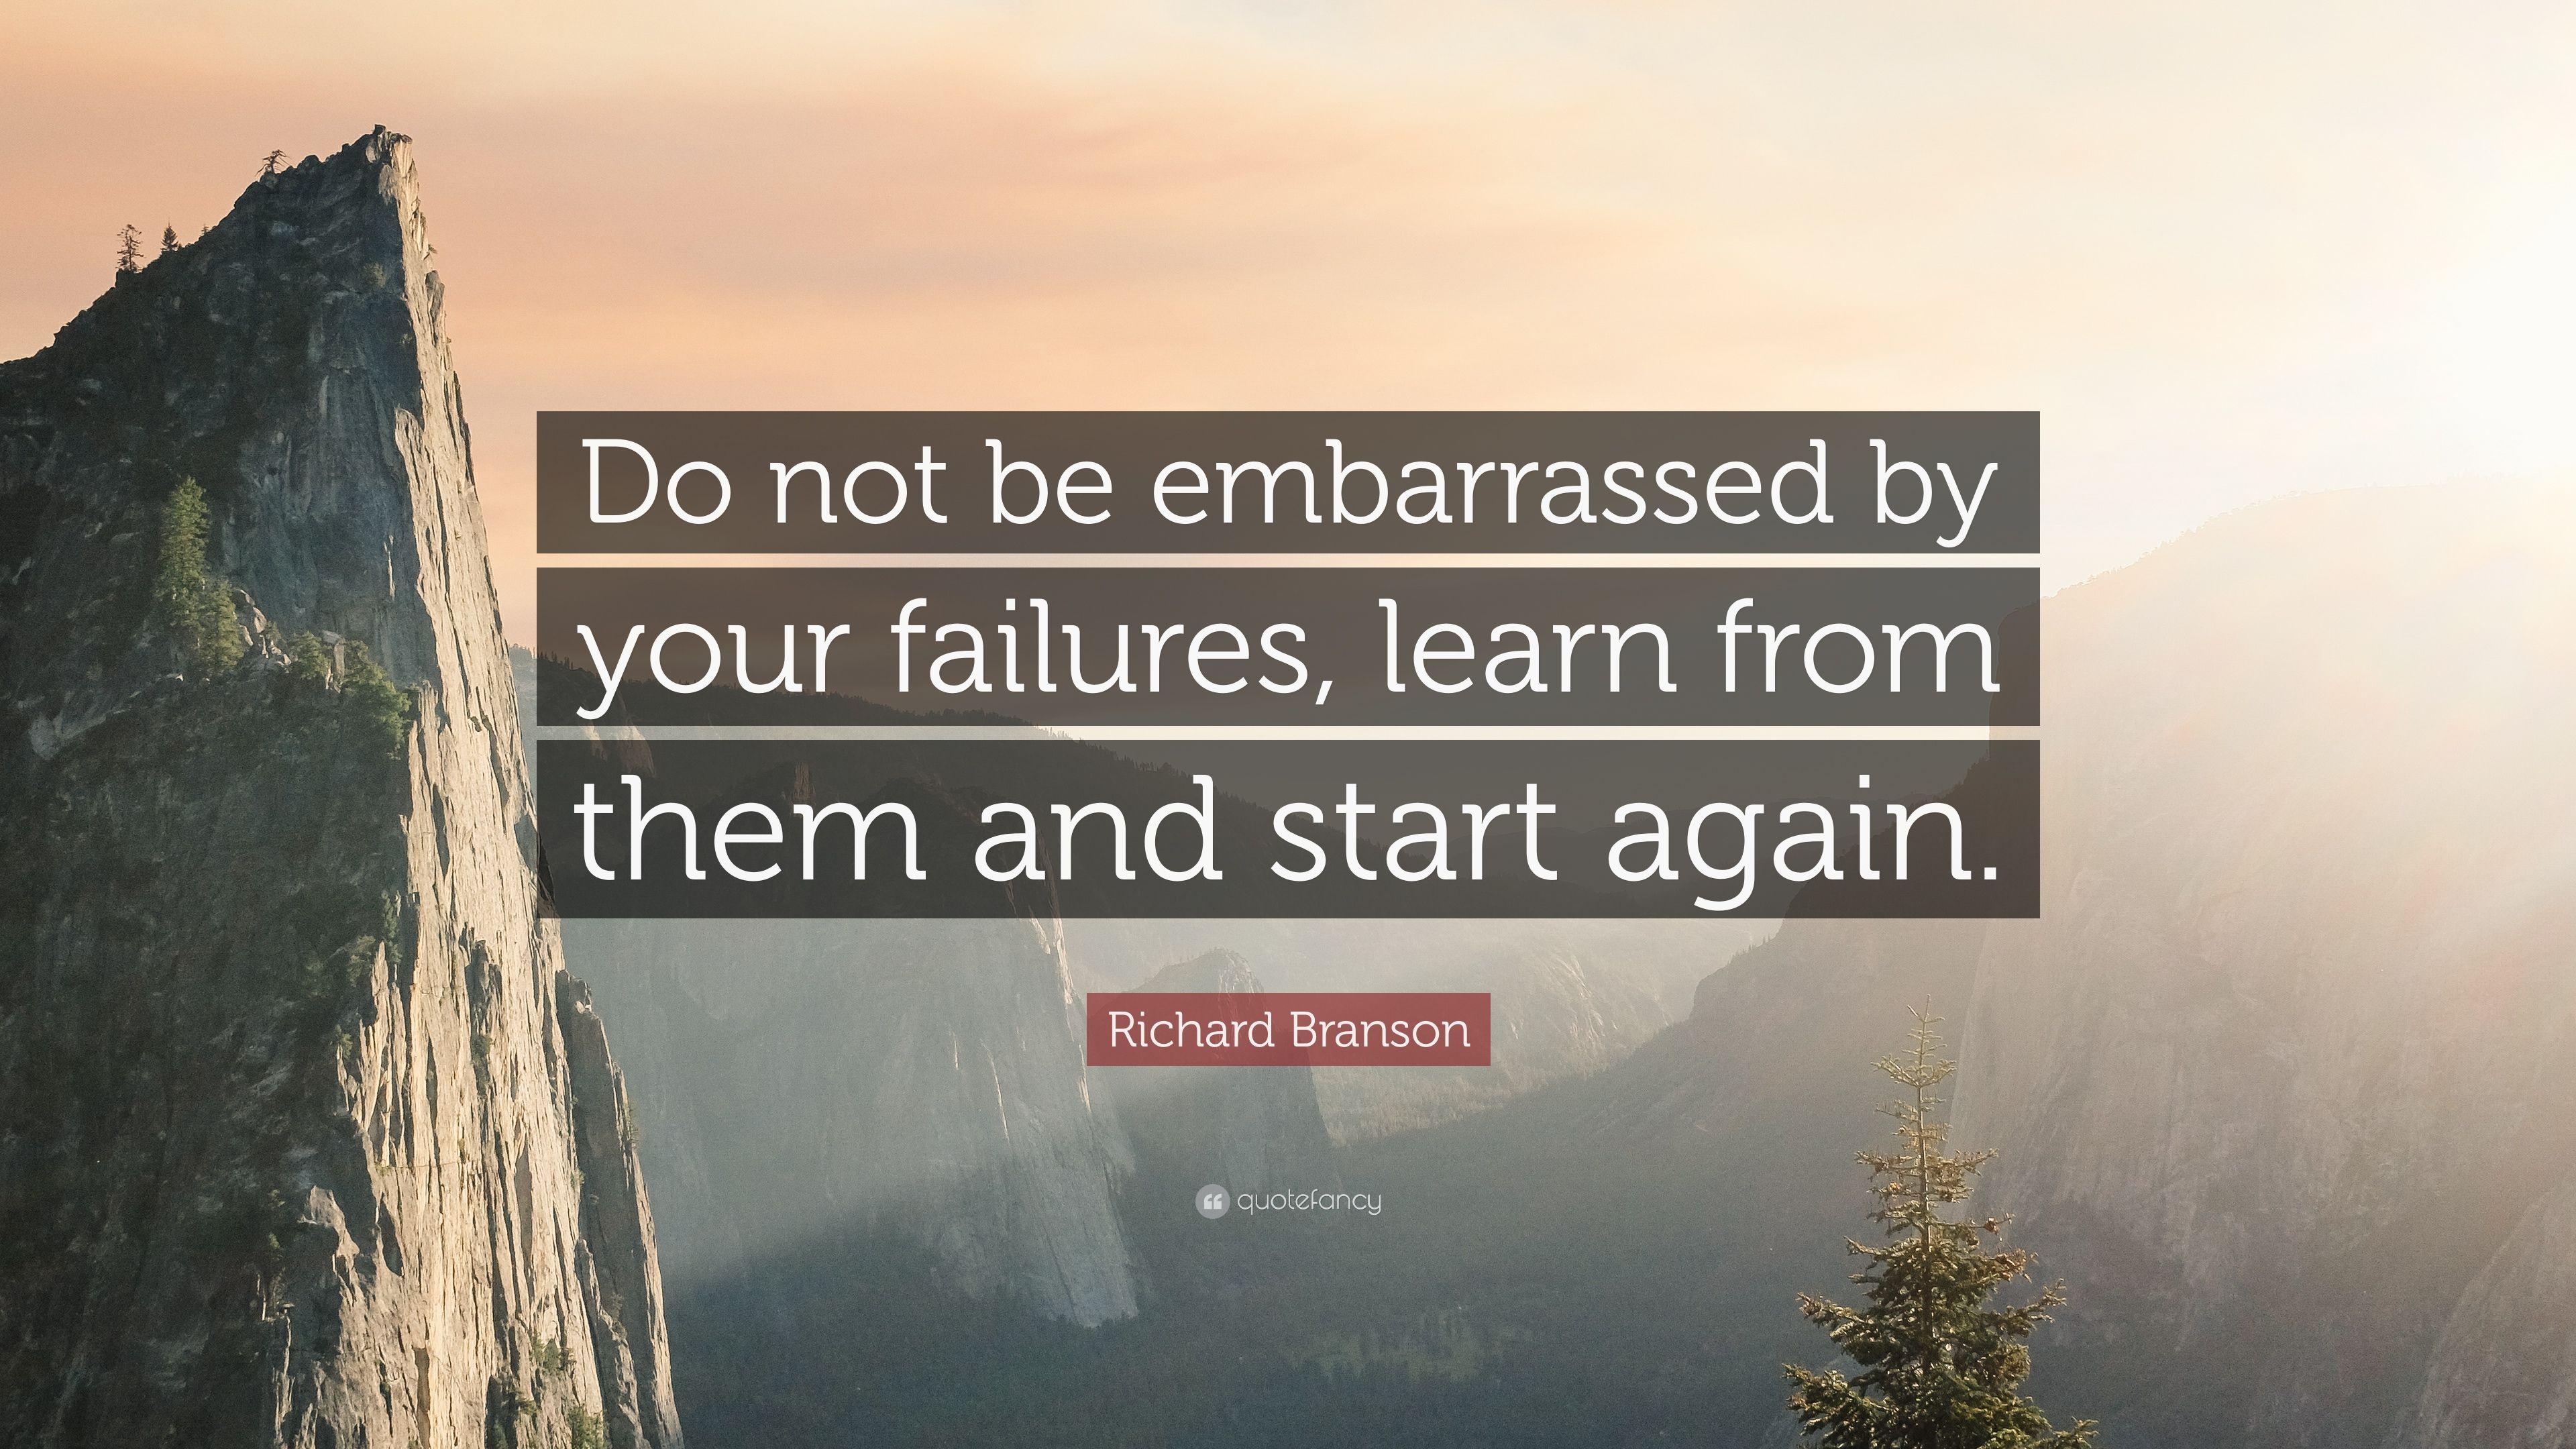 Richard Branson Quote: “Do not be embarrassed